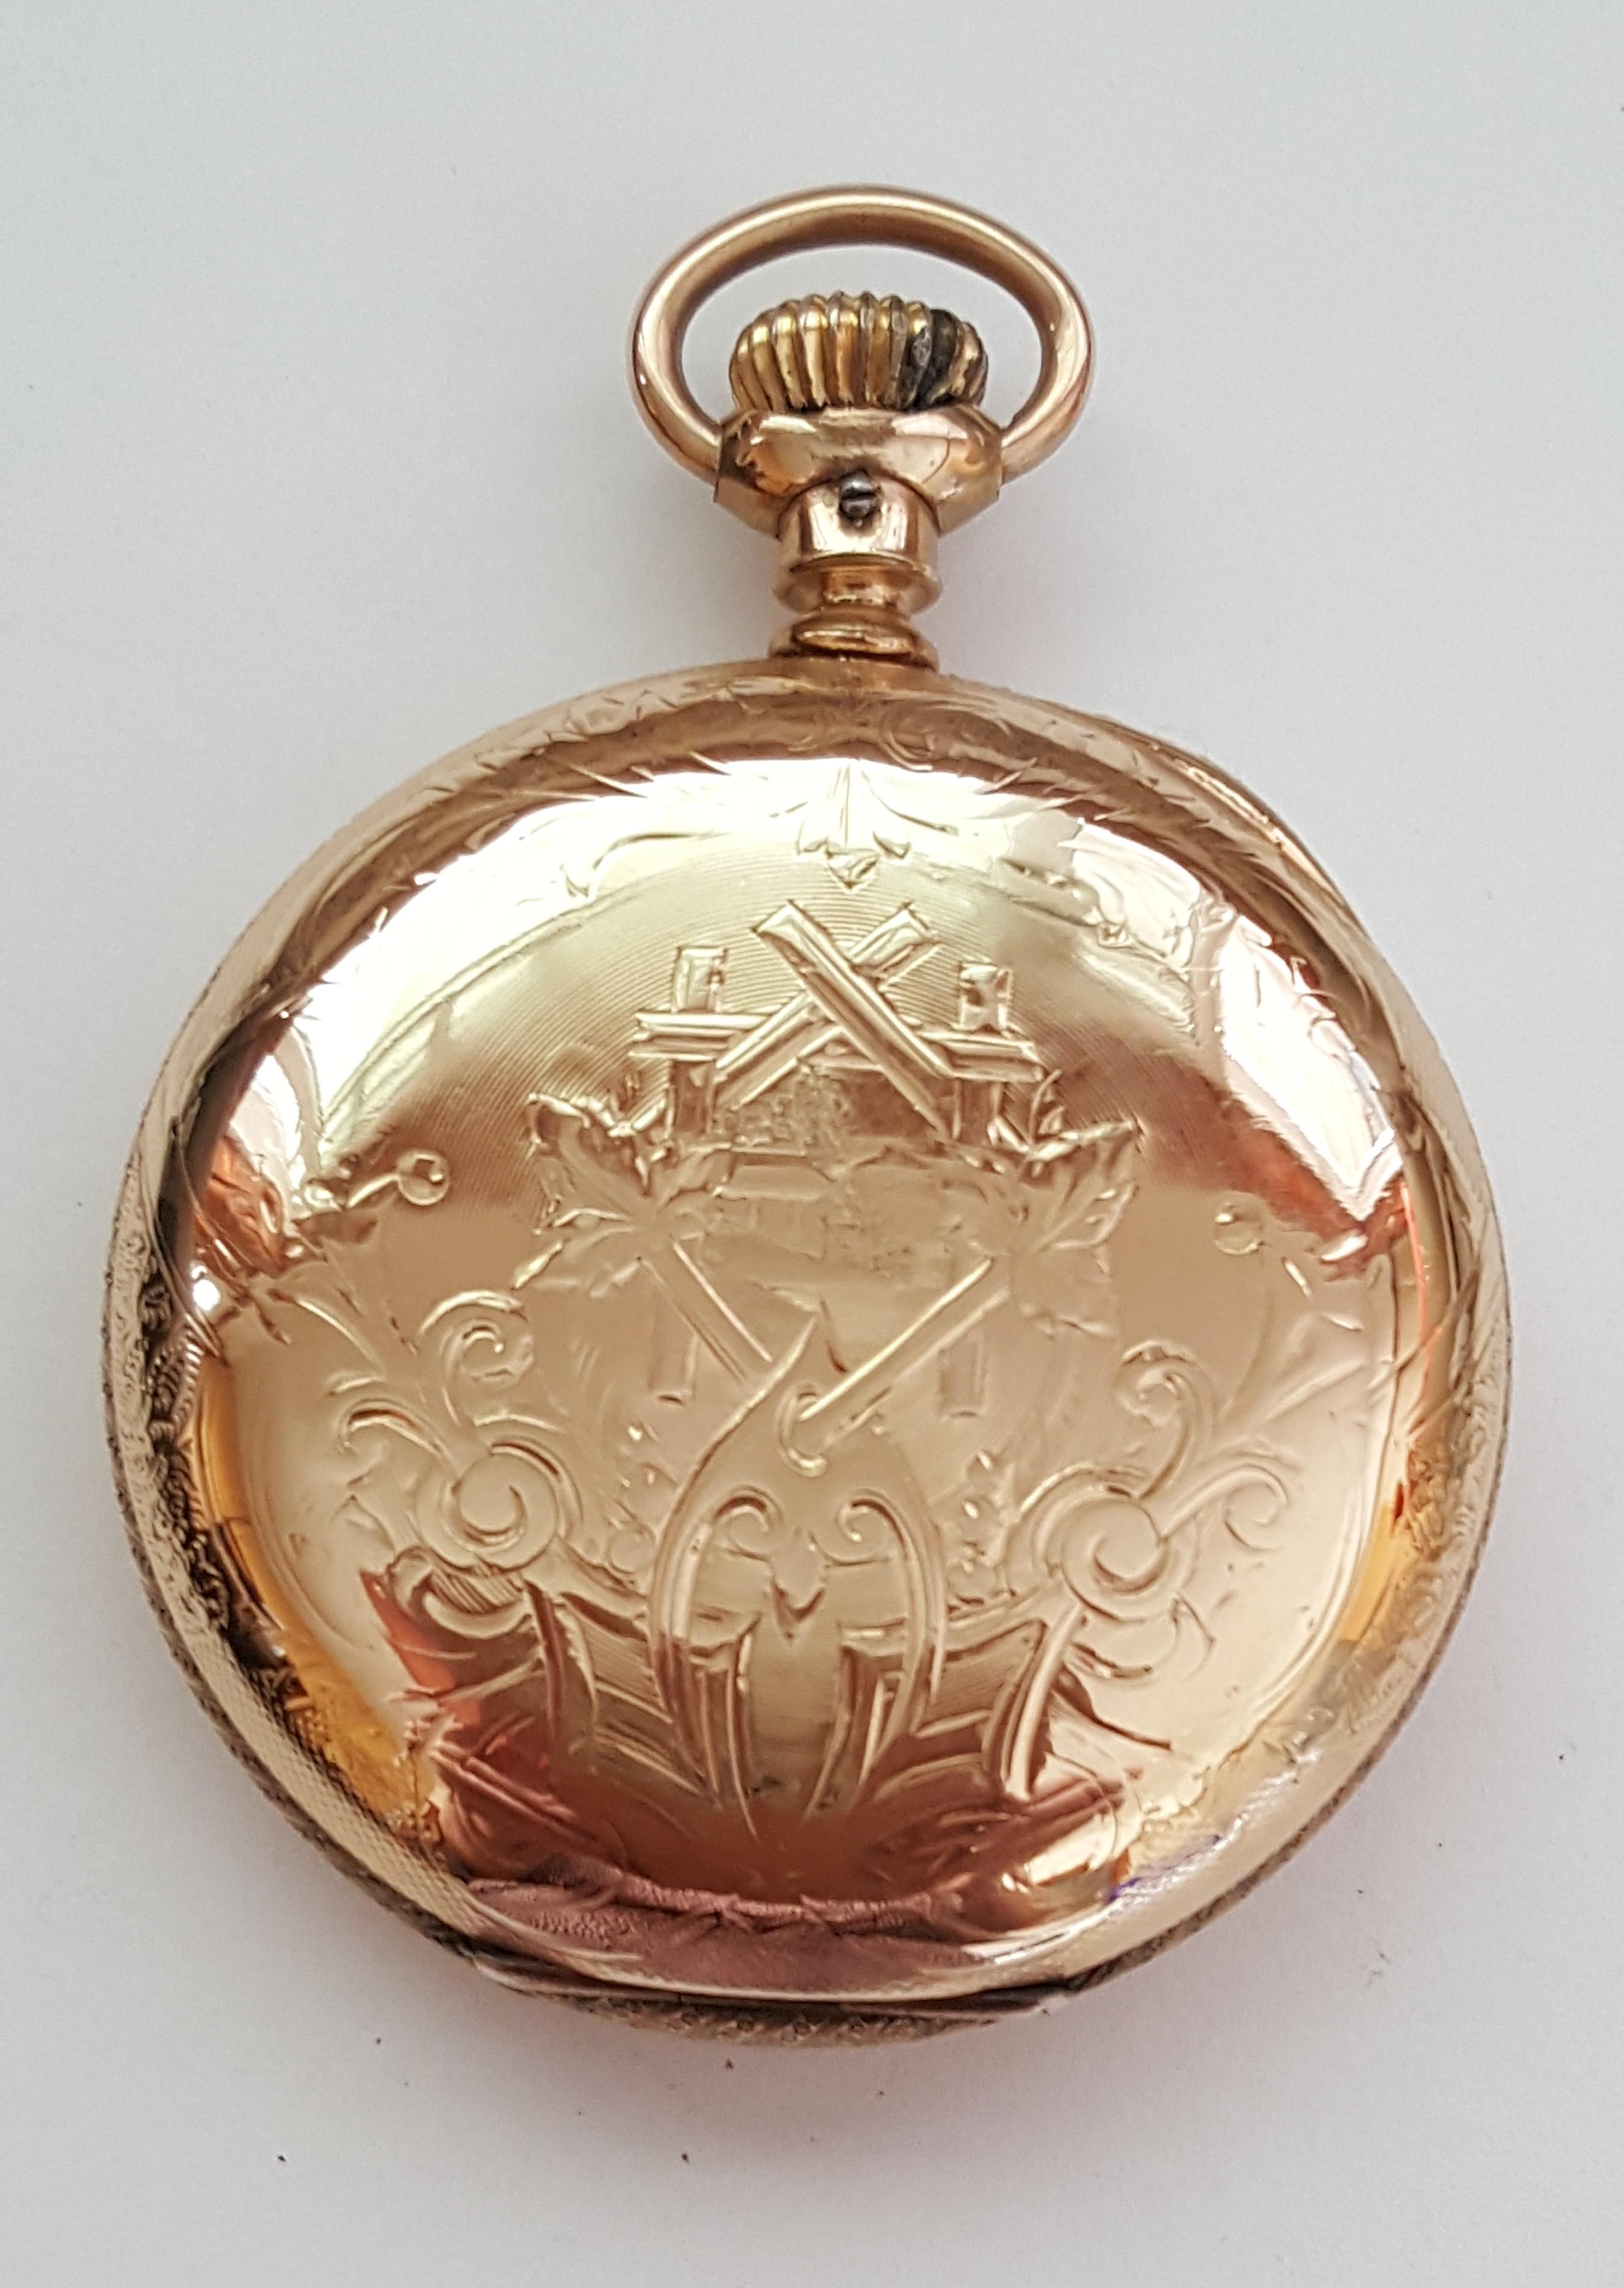 Vintage Elgin Pocket Watch, Yellow Gold Plated, 52 mm Case, Year 1893, Seven Jewel, Size 16s, Model 3, Grade 114, Very Good Condition, Grade: 114. 
This watch is not working and is sold as is. Plastic crystal is in very good condition, white face,